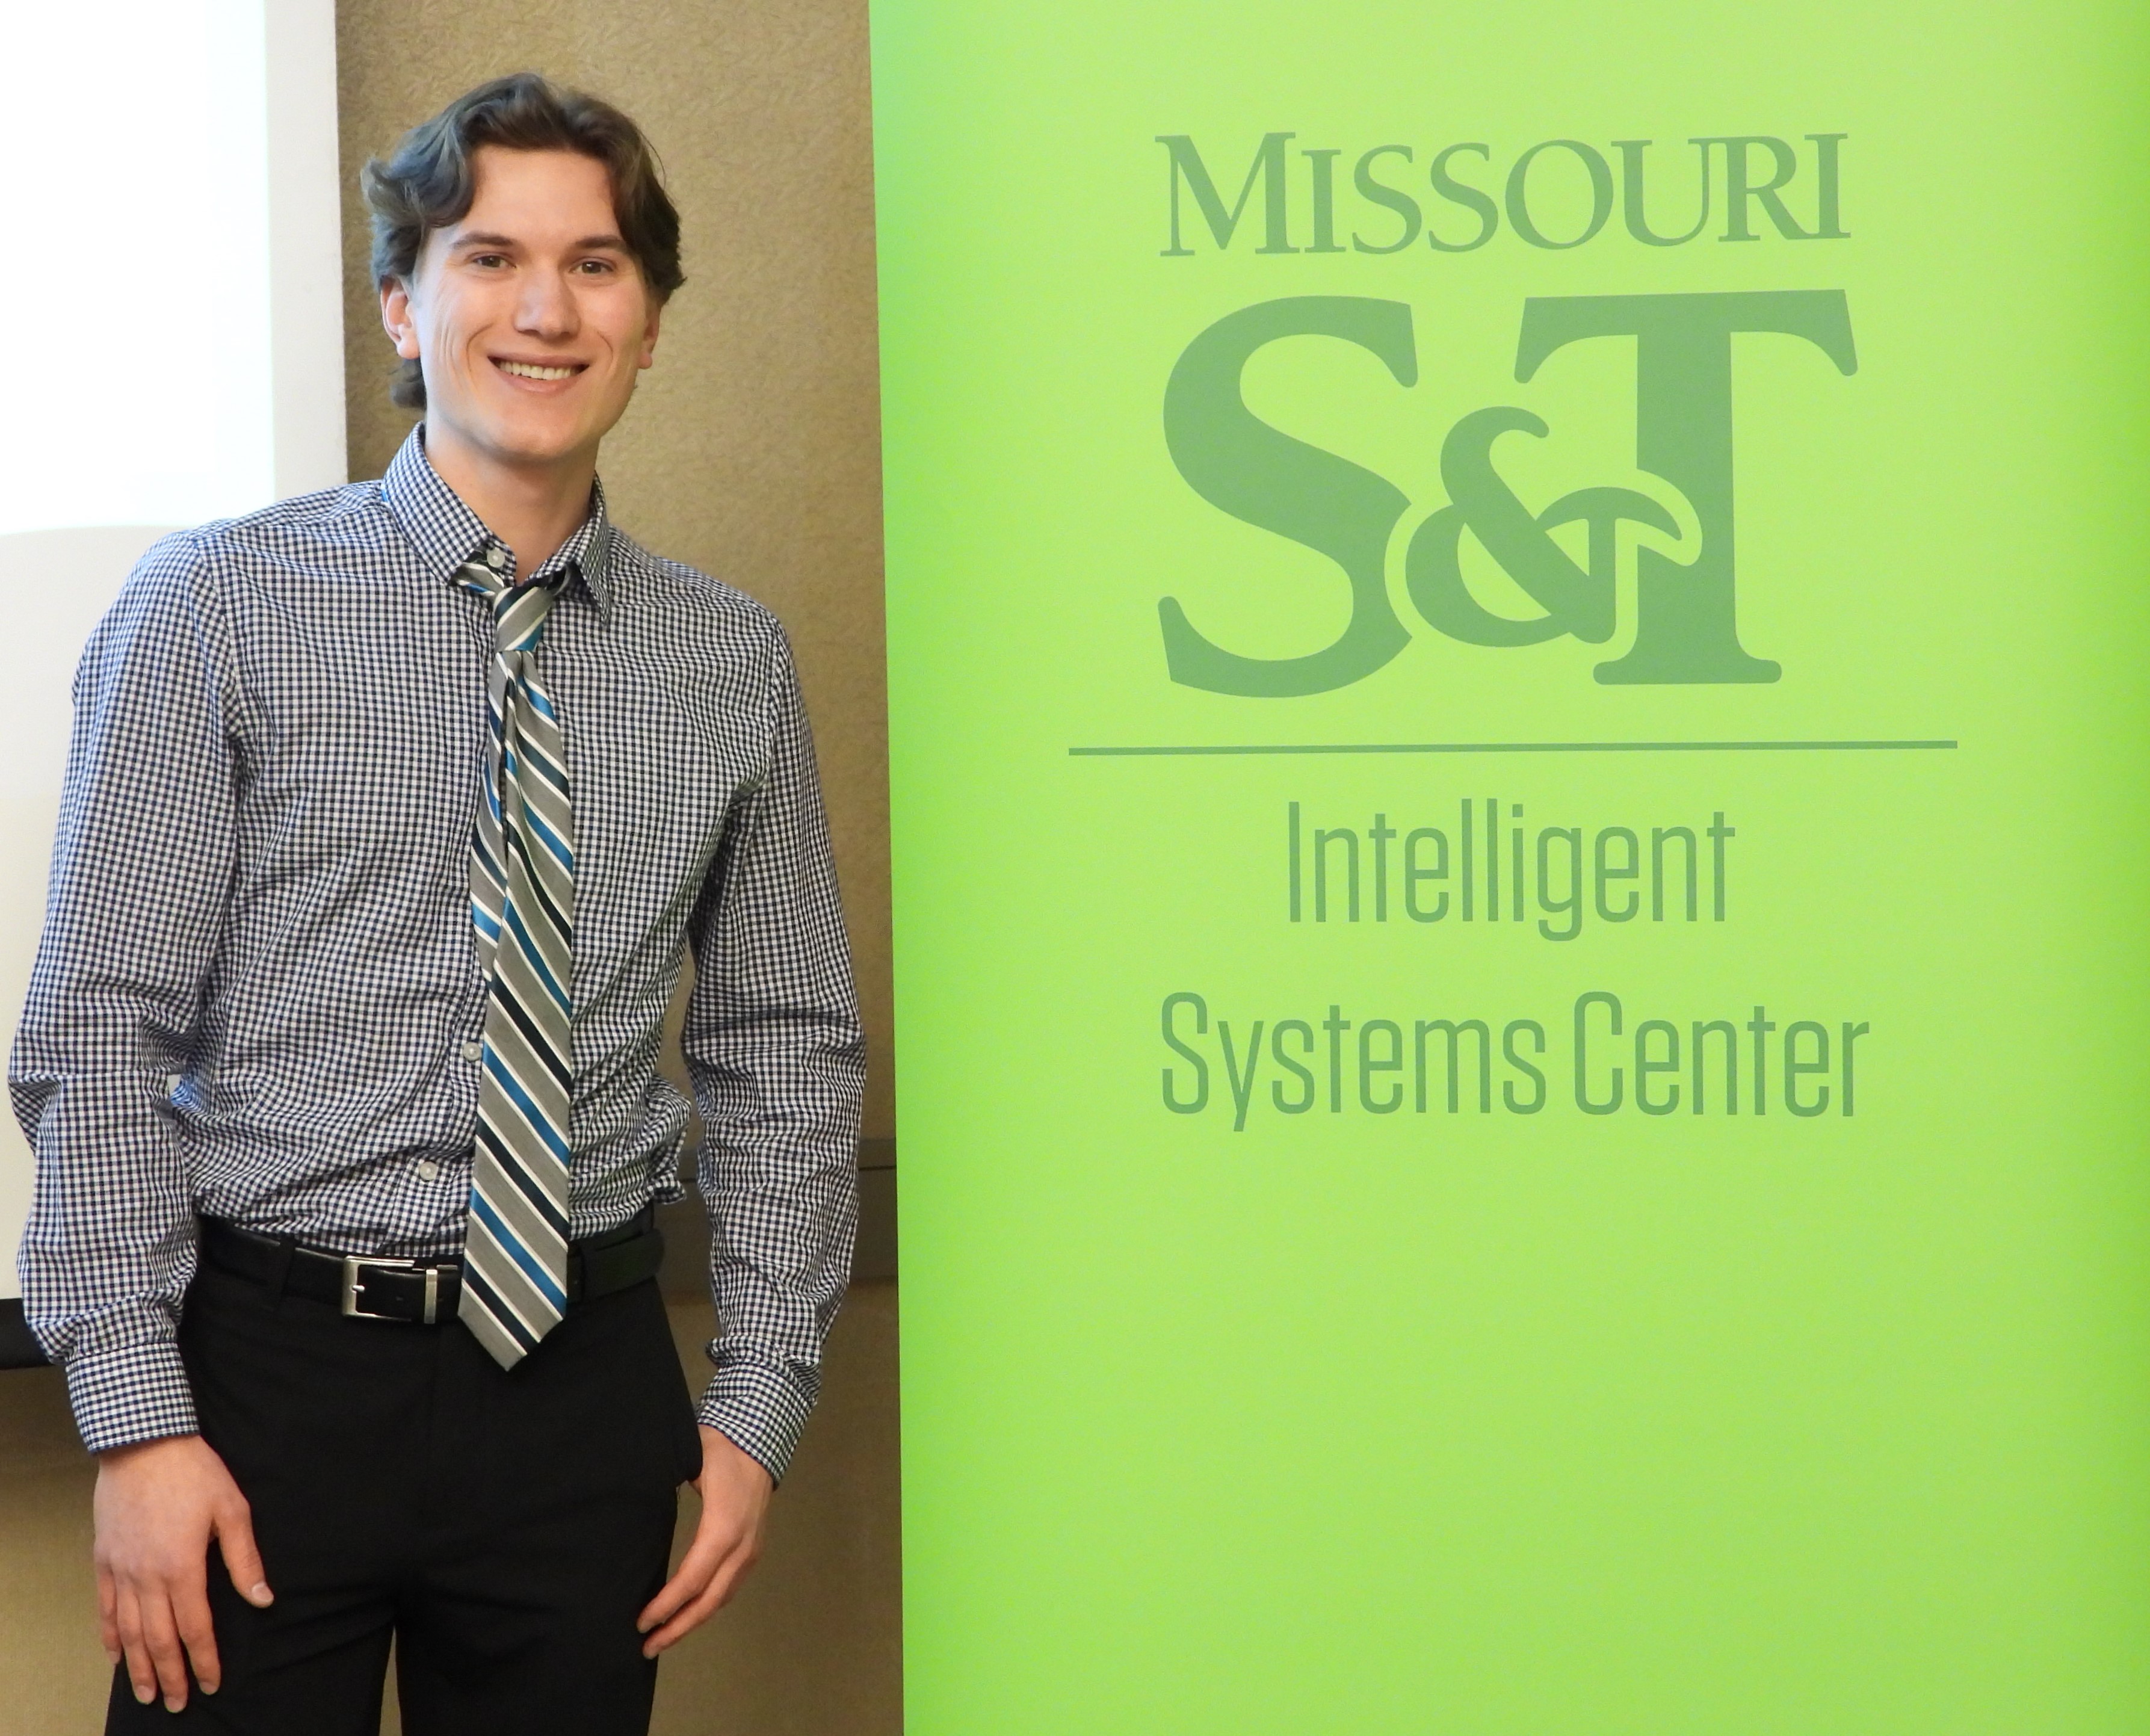 Graduate researcher, Colton Walker, smiling in front of Intelligent Systems Center banner.